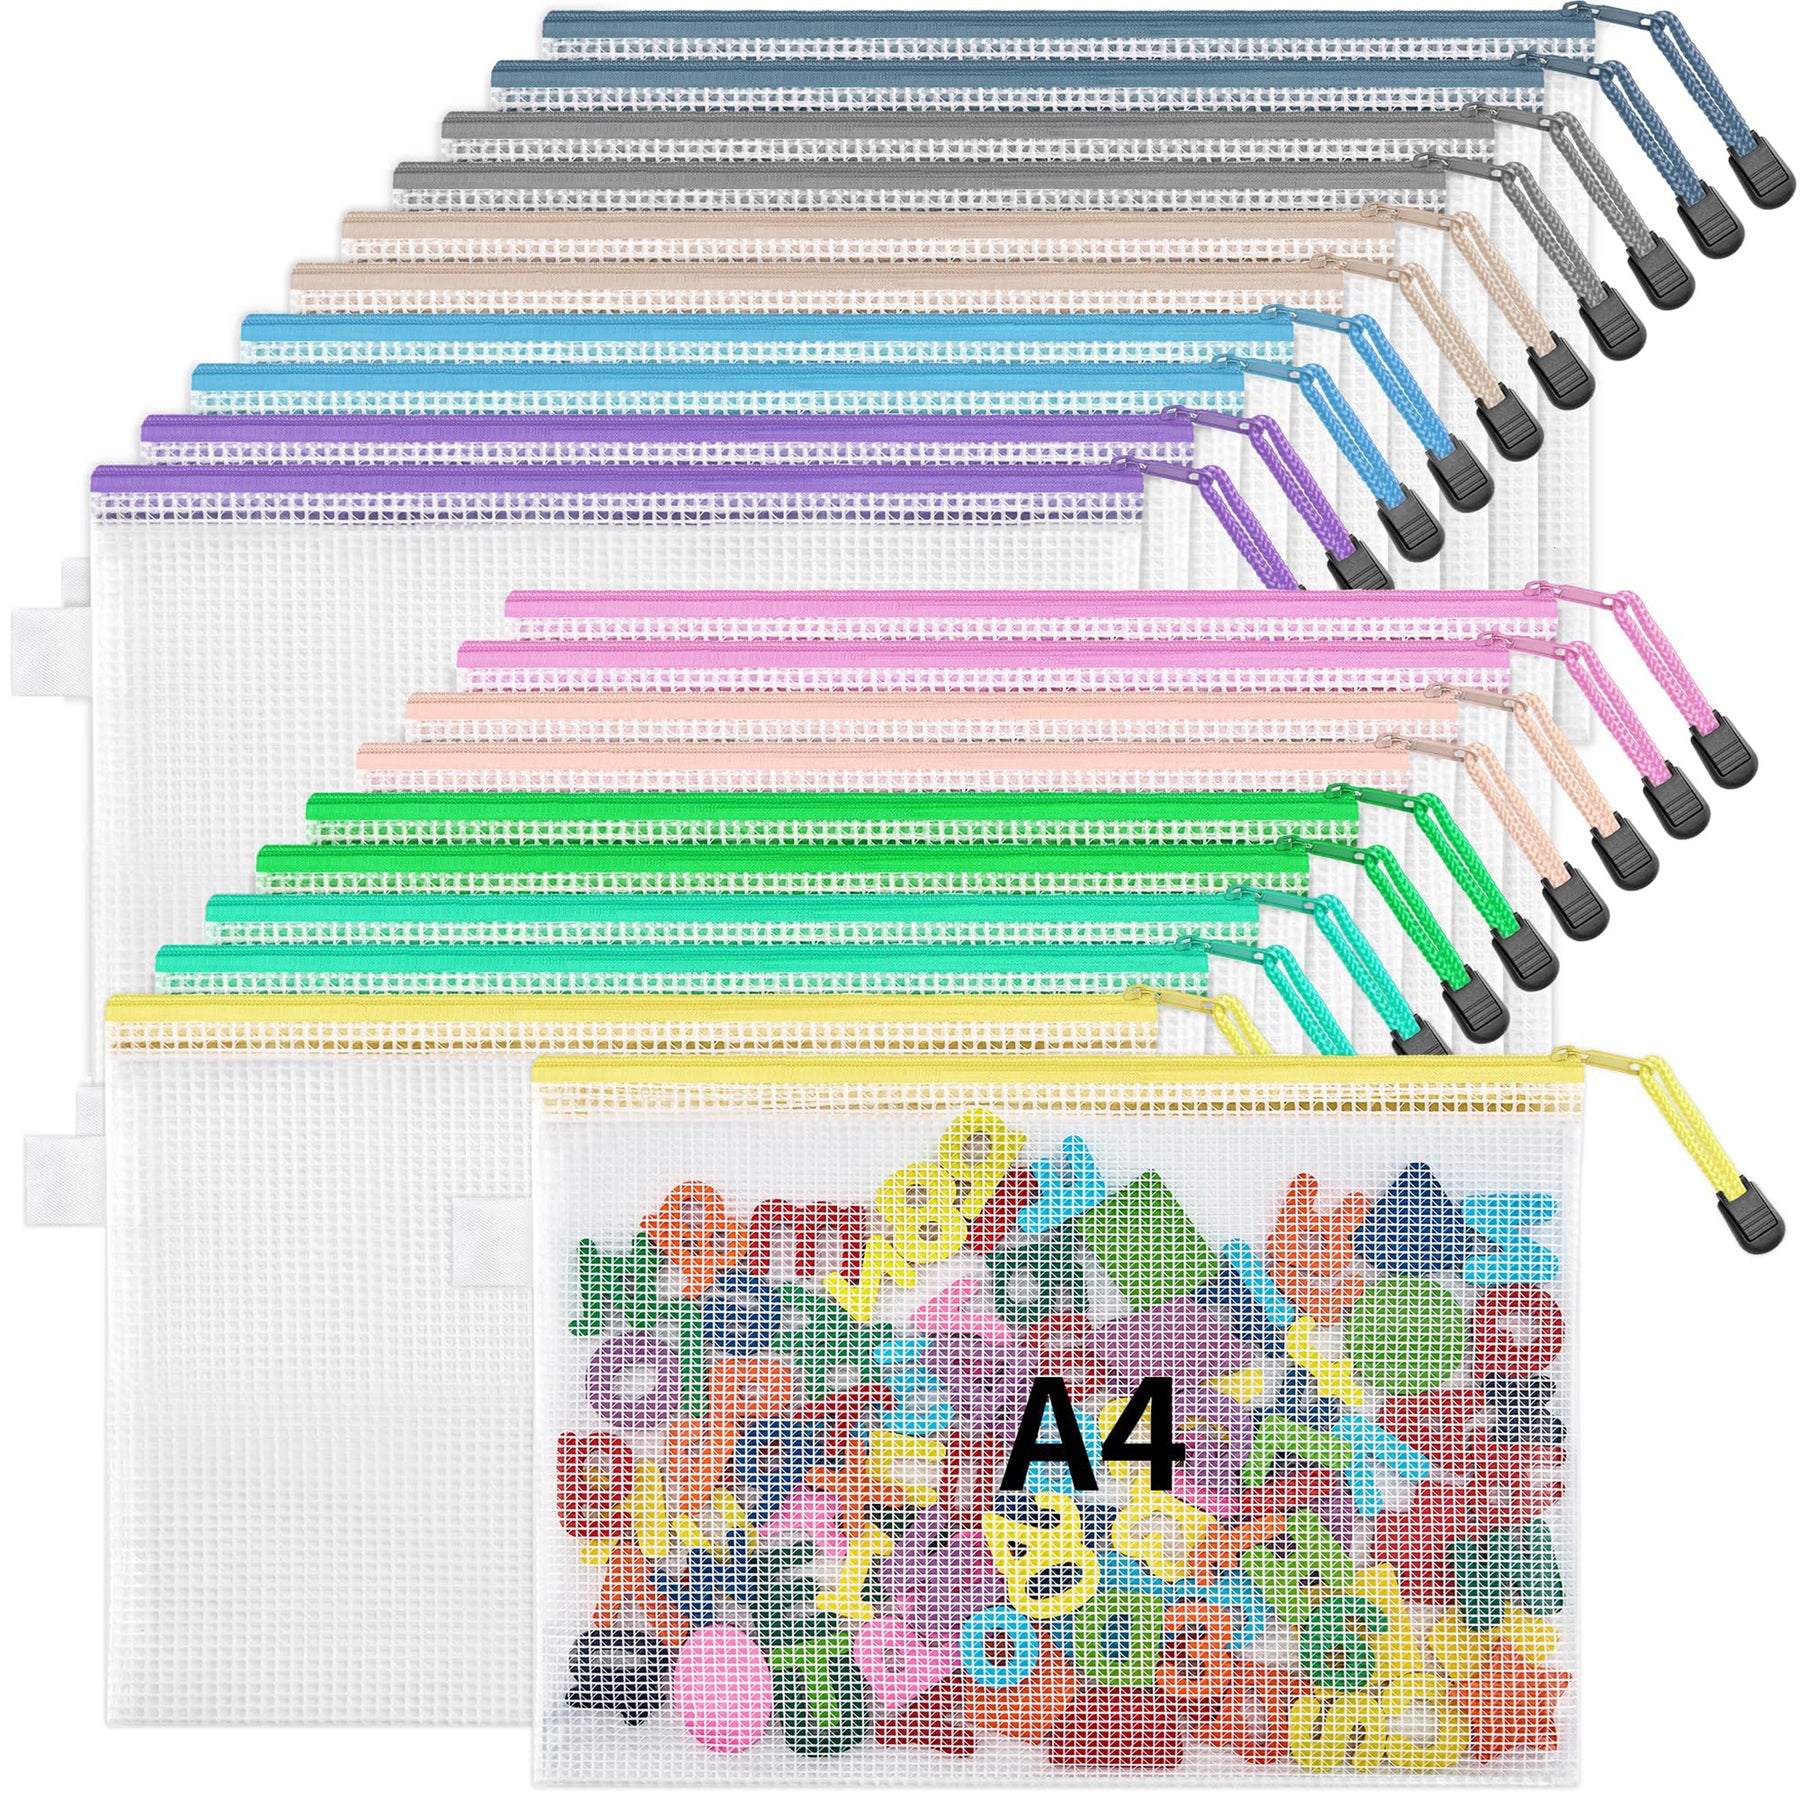 JARLINK 20PCS Mesh Zipper Pouch Bags, A3 Puzzle Bags with Zipper, Waterproof Zipper Pouches for Classroom Organization, Board Game Storage, Travel, Office, School Supplies, 10 Colors